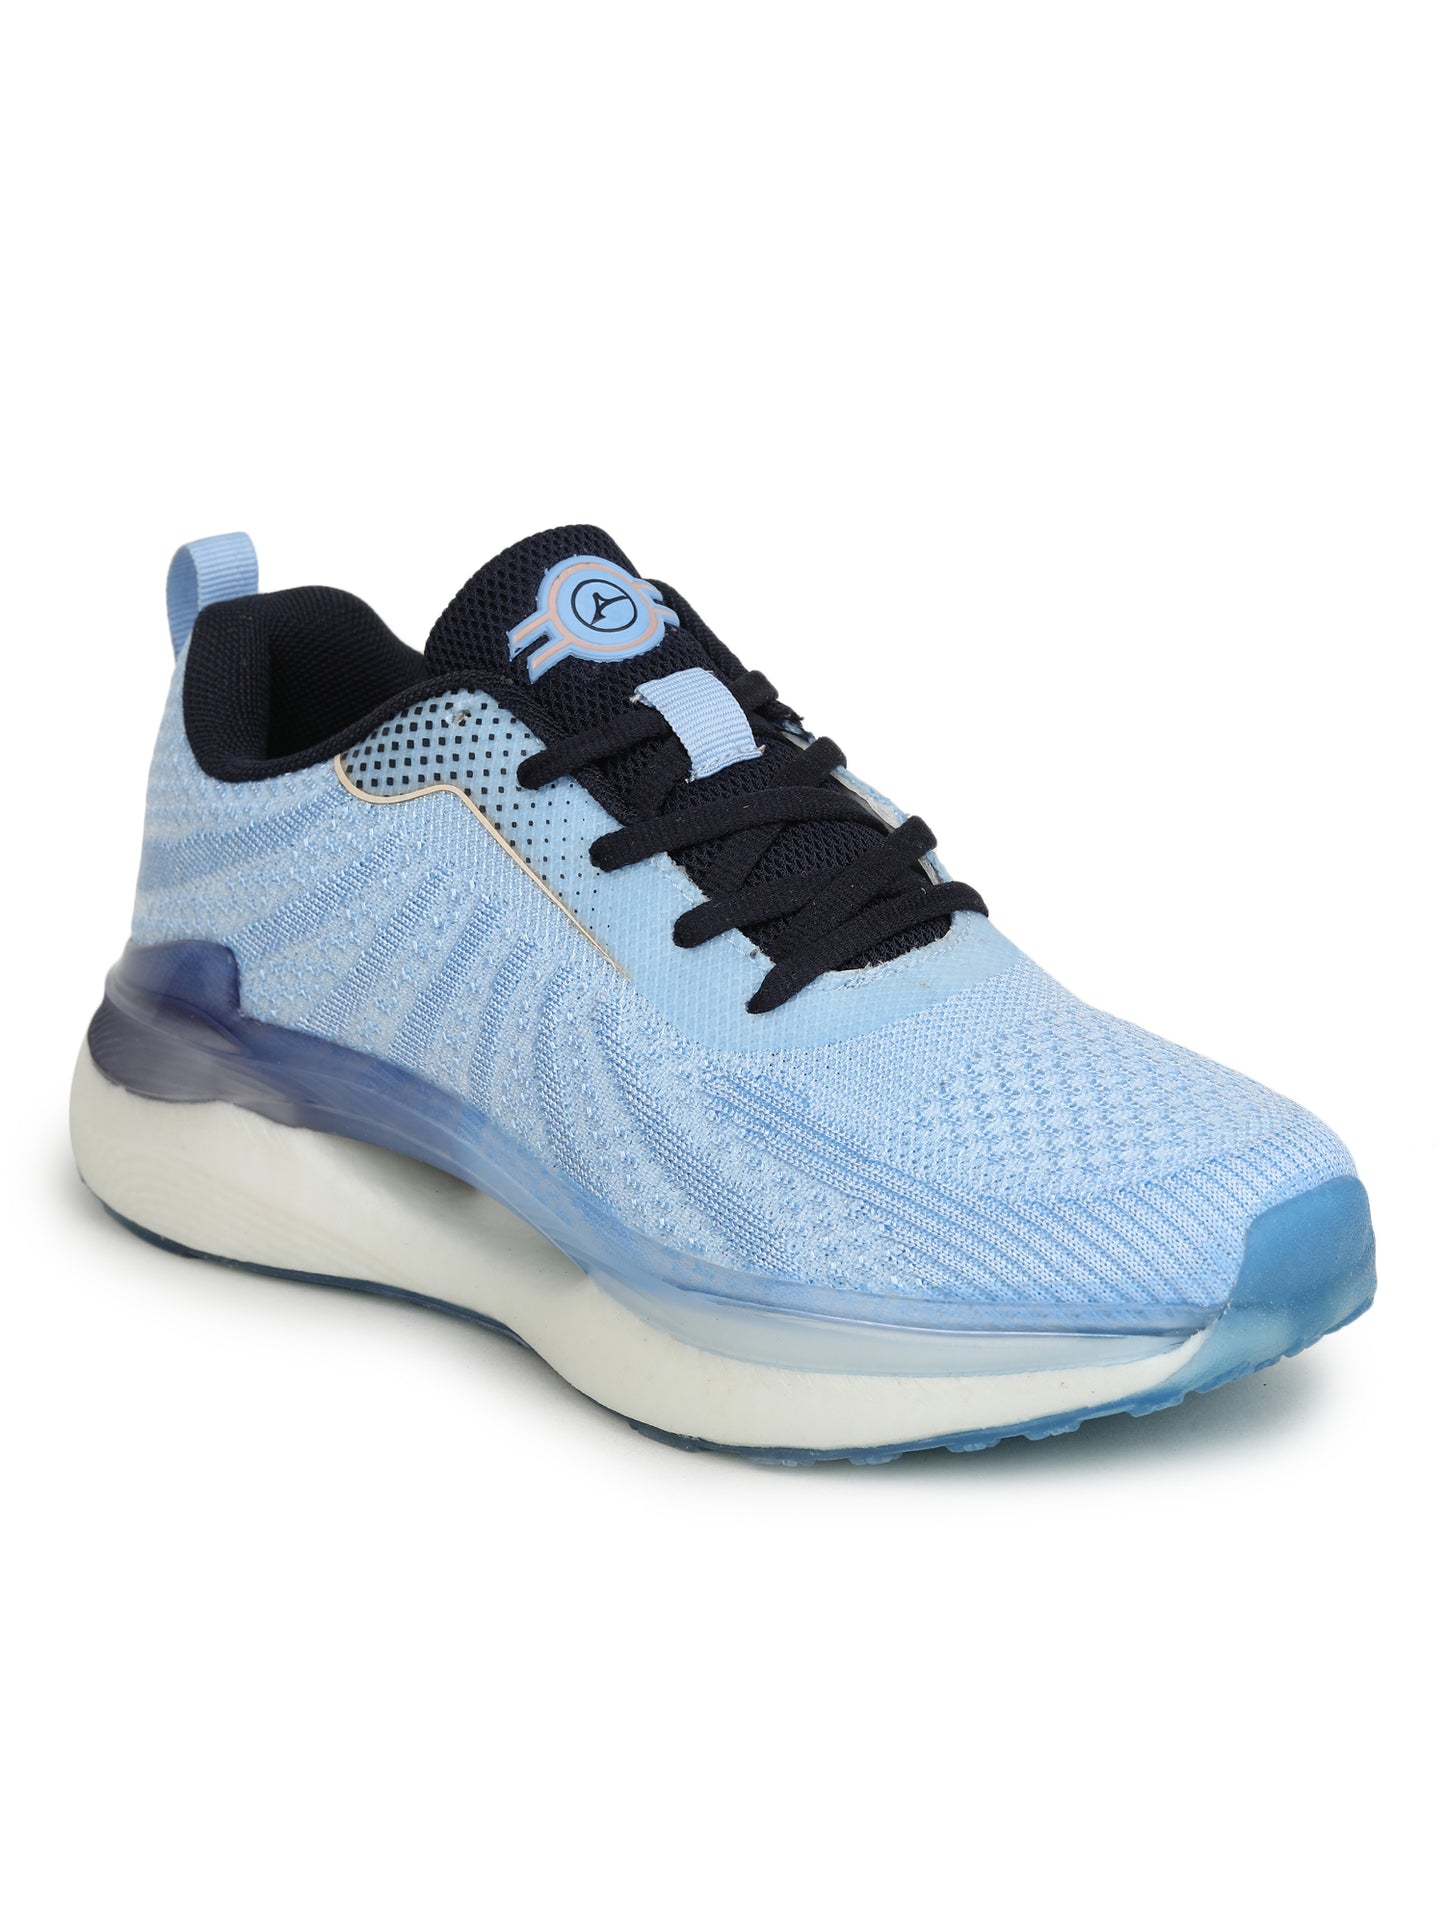 ABROS DYNA SPORTS SHOES FOR WOMEN